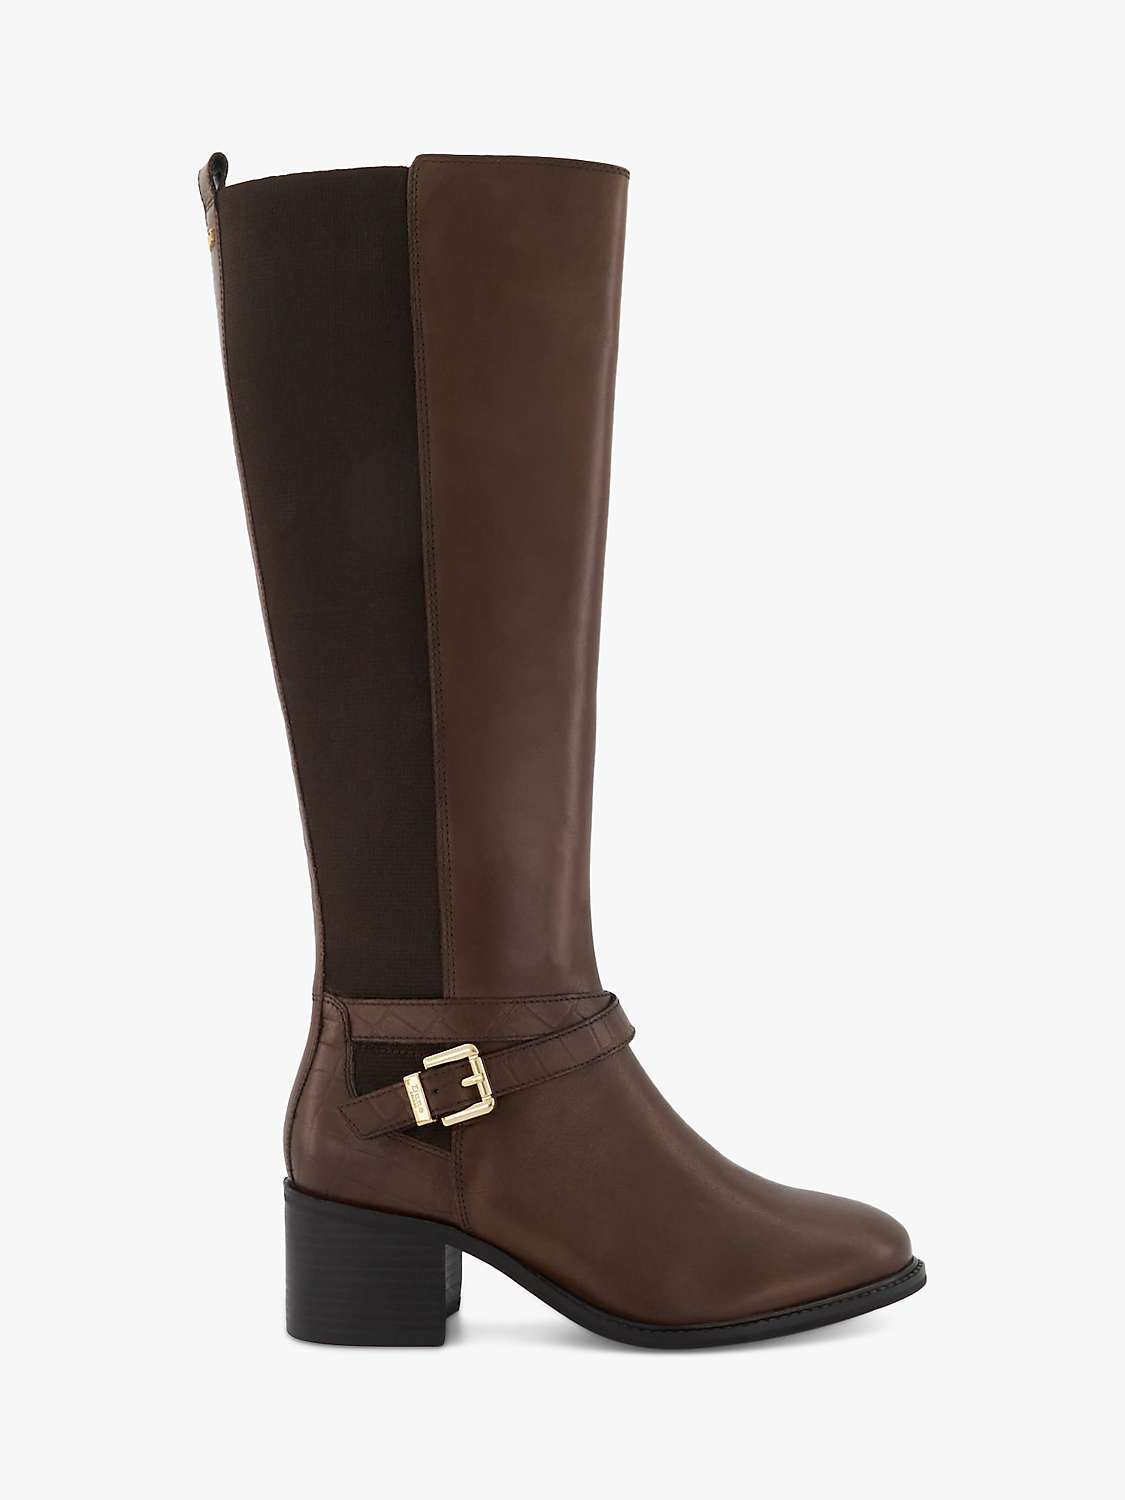 Buy Dune Tildy Leather Knee High Boots, Brown Online at johnlewis.com